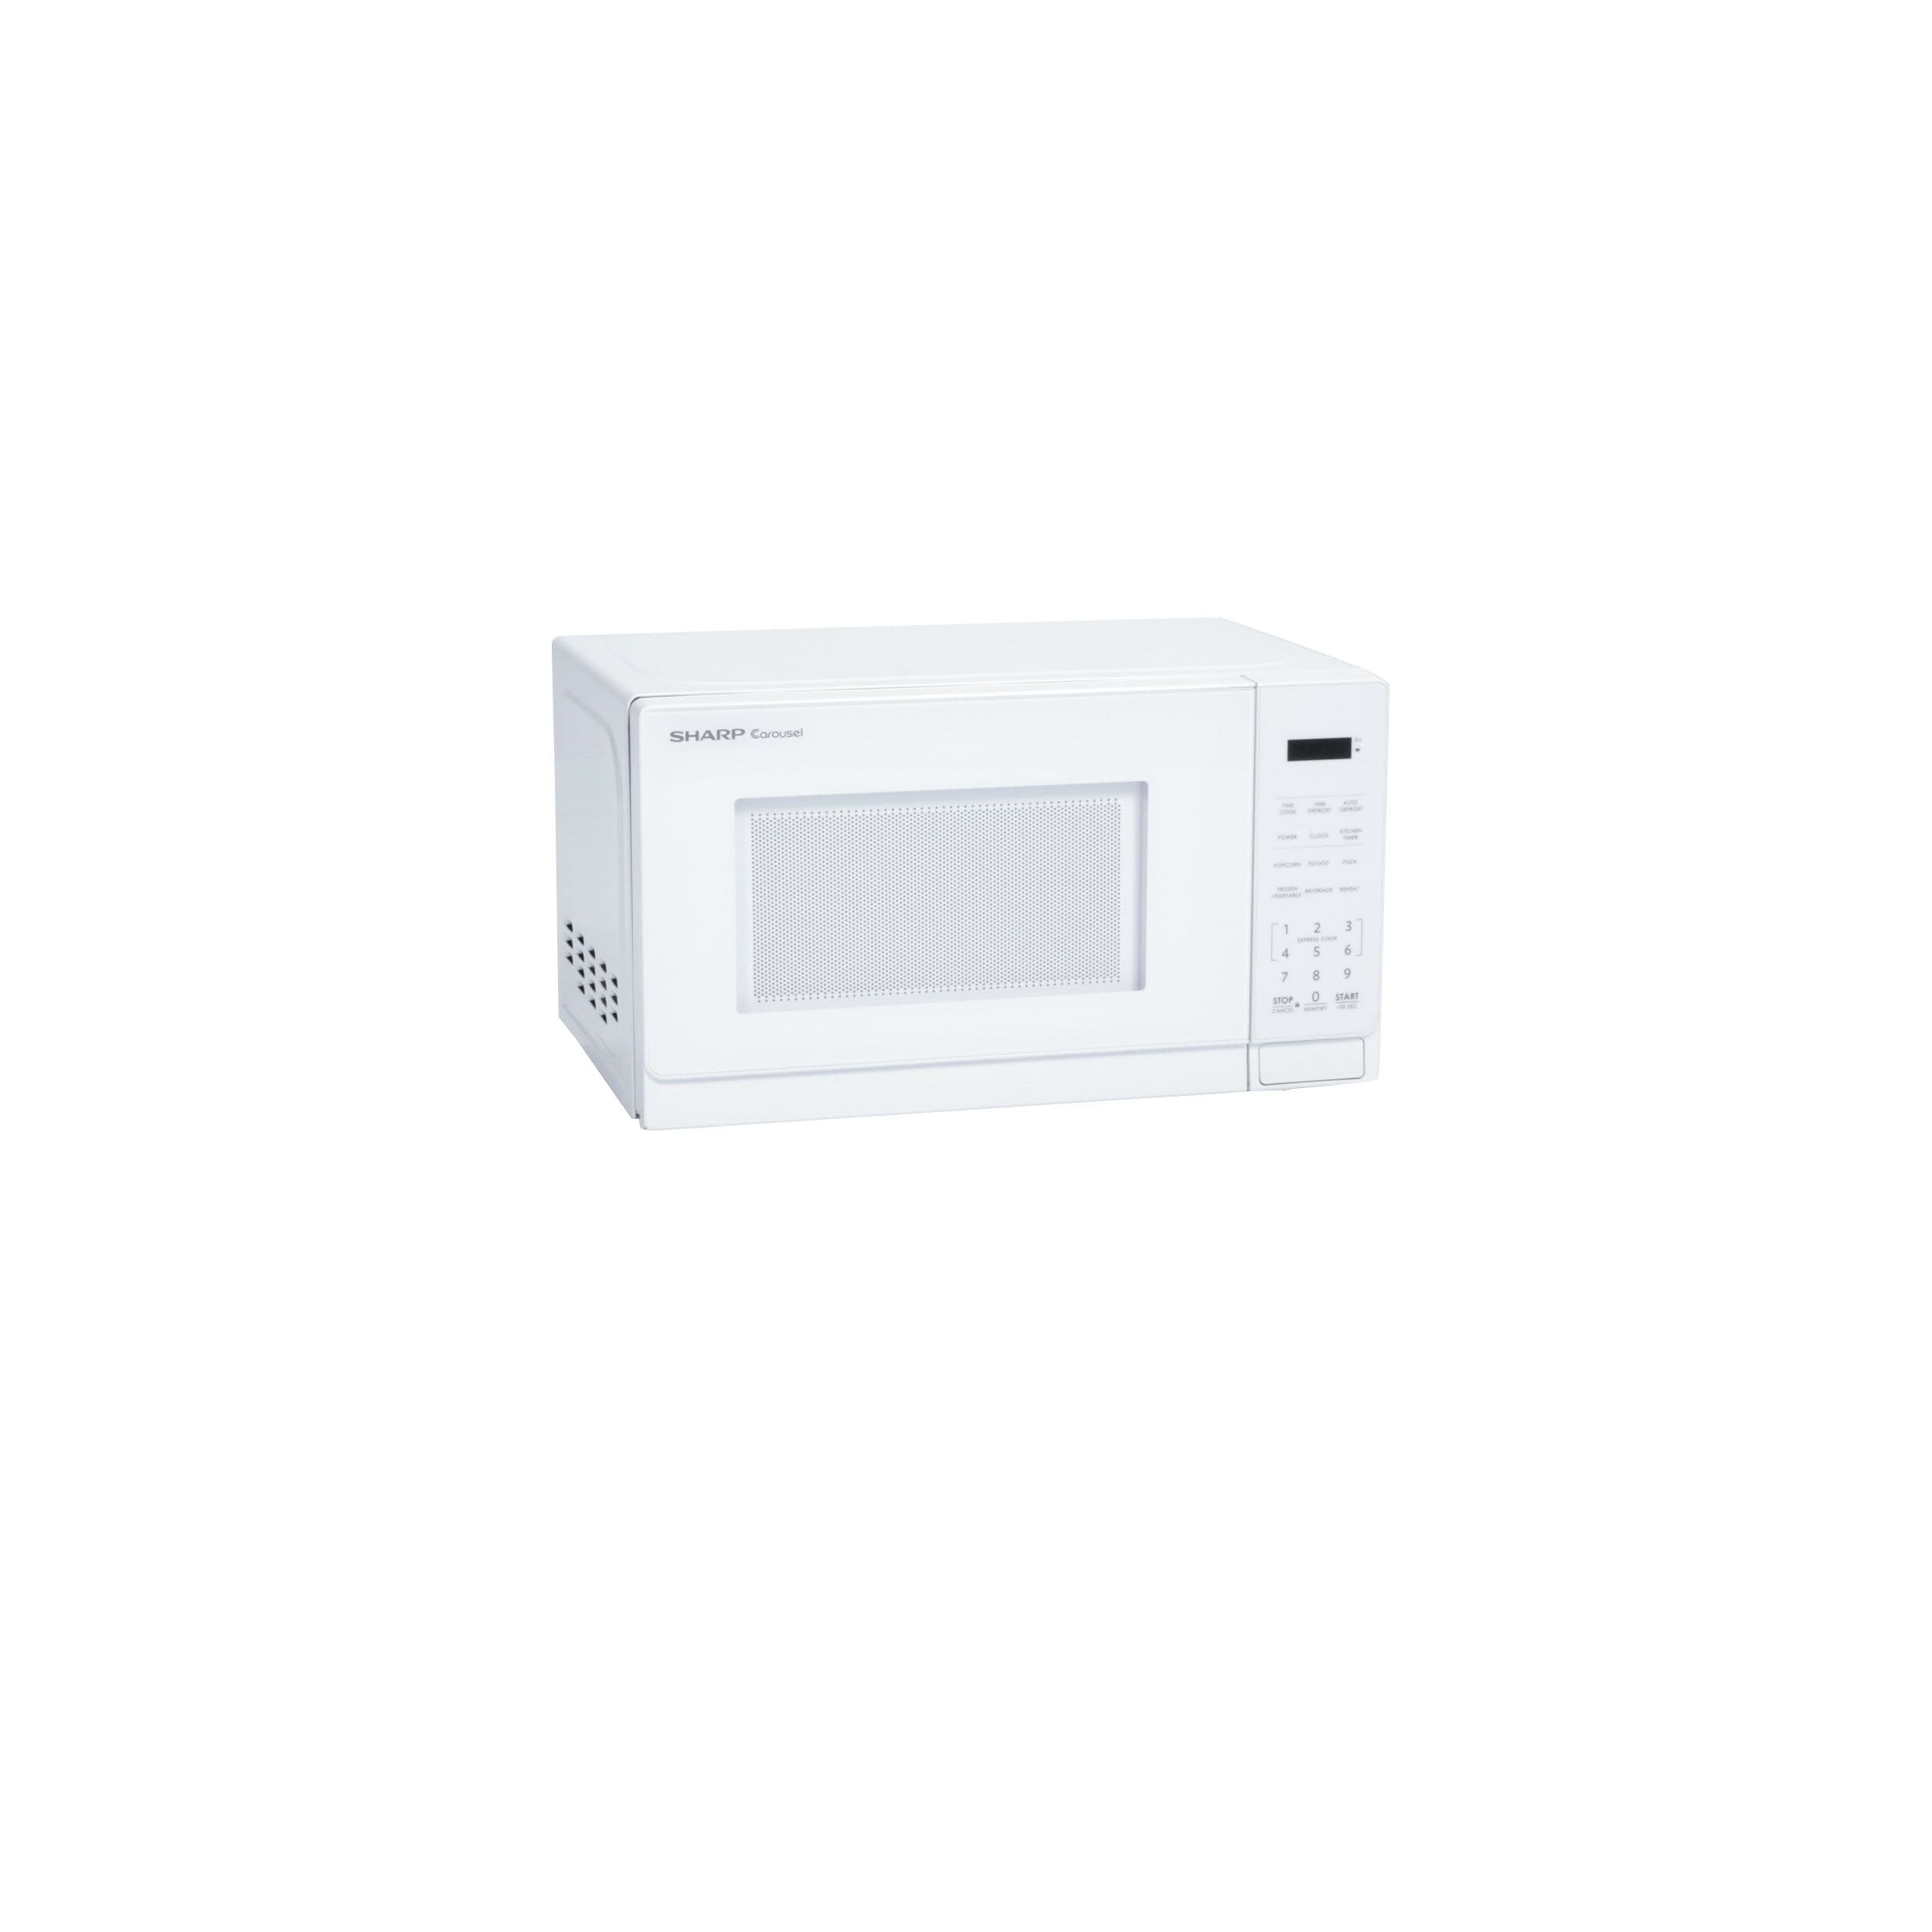 Sharp ZSMC1131CW 1.1 CU FT Microwave White for sale online 